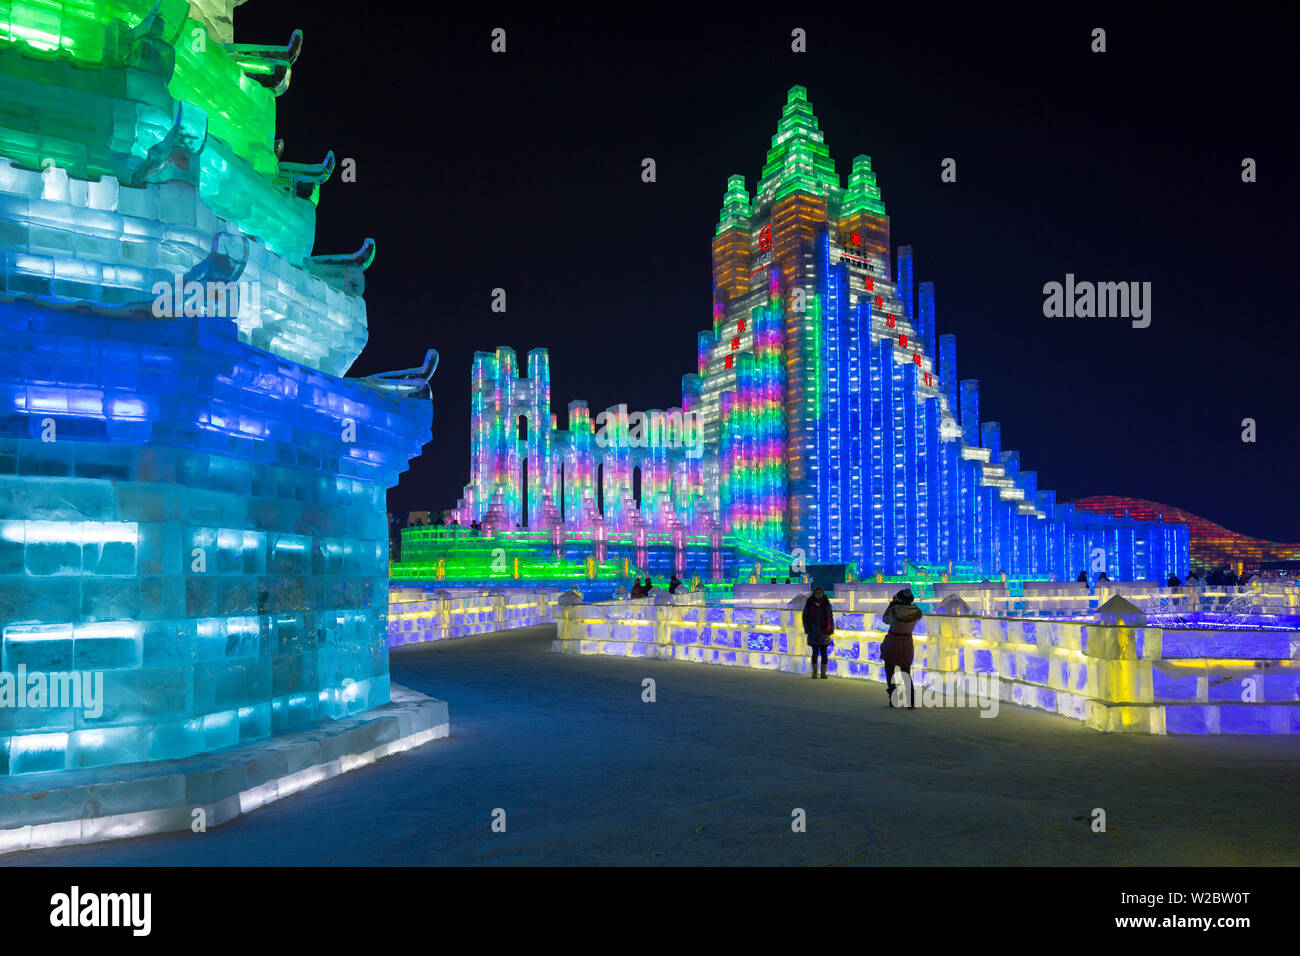 Spectacular illuminated ice sculptures at the Harbin Ice and Snow Festival in Heilongjiang Province, Harbin,  China Stock Photo